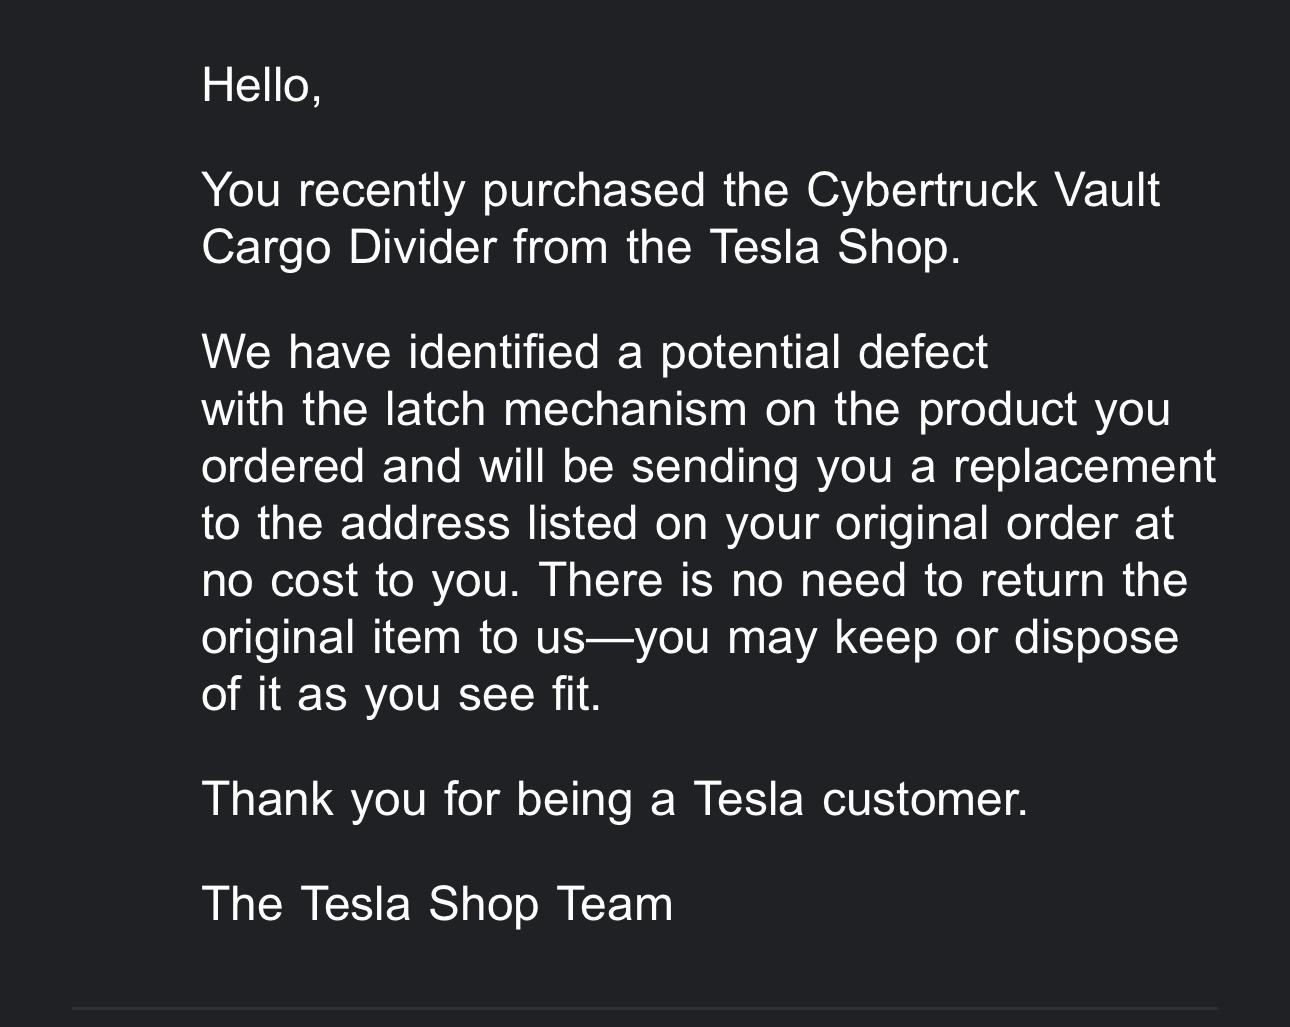 Tesla Cybertruck Replacement Vault Cargo Dividers being sent out. IMG_2138